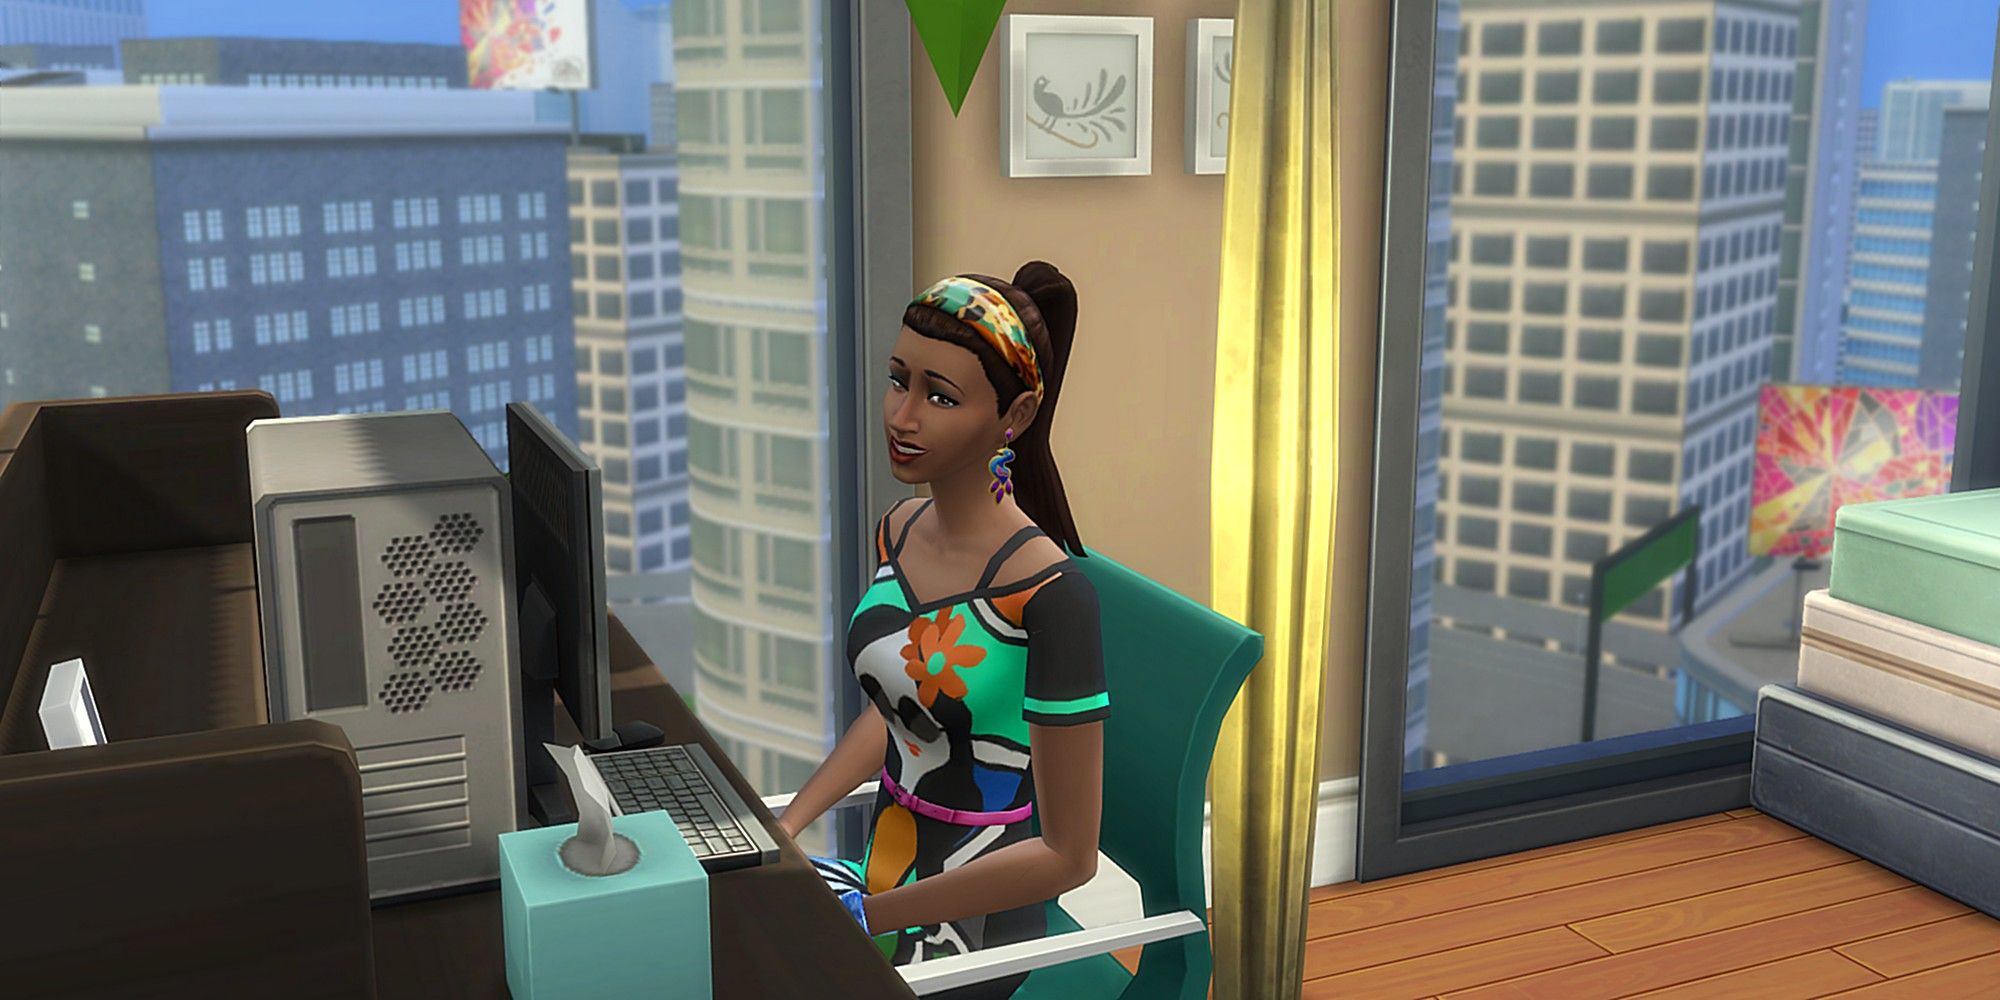 Penny Pizzazz in her apartment in The Sims 4 City Living